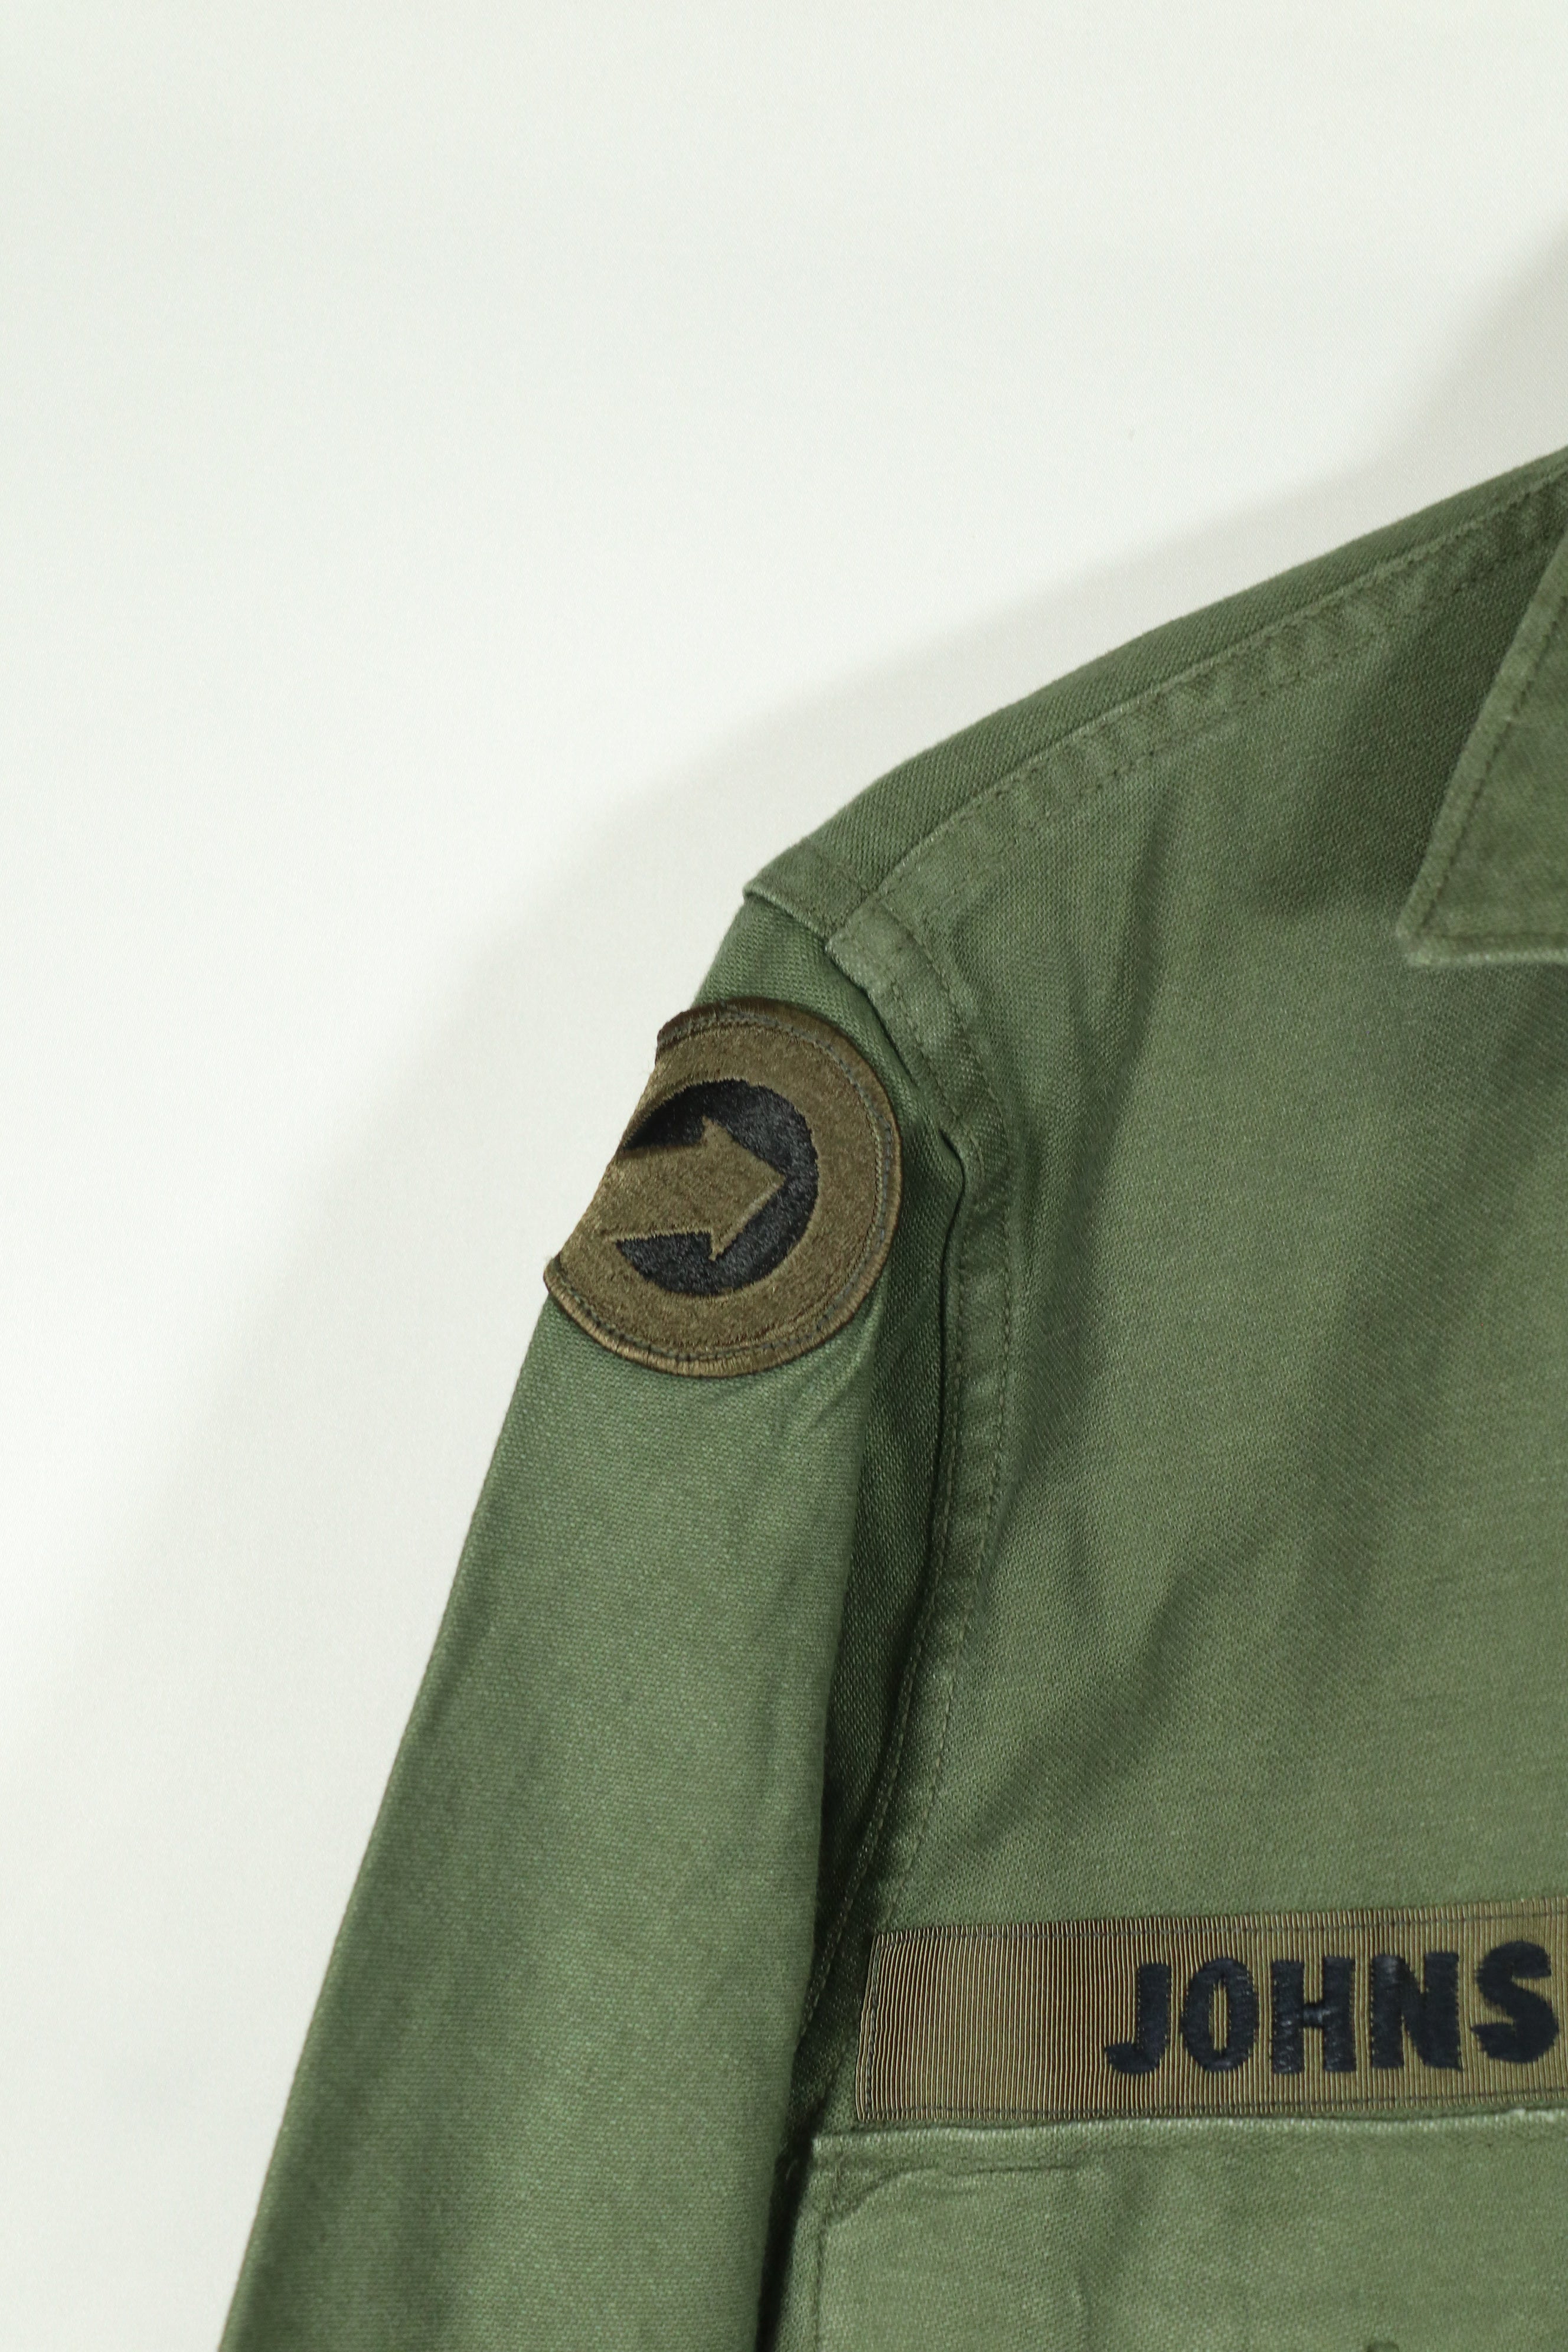 Real OG-107 Utility Shirt Patch Restored Used